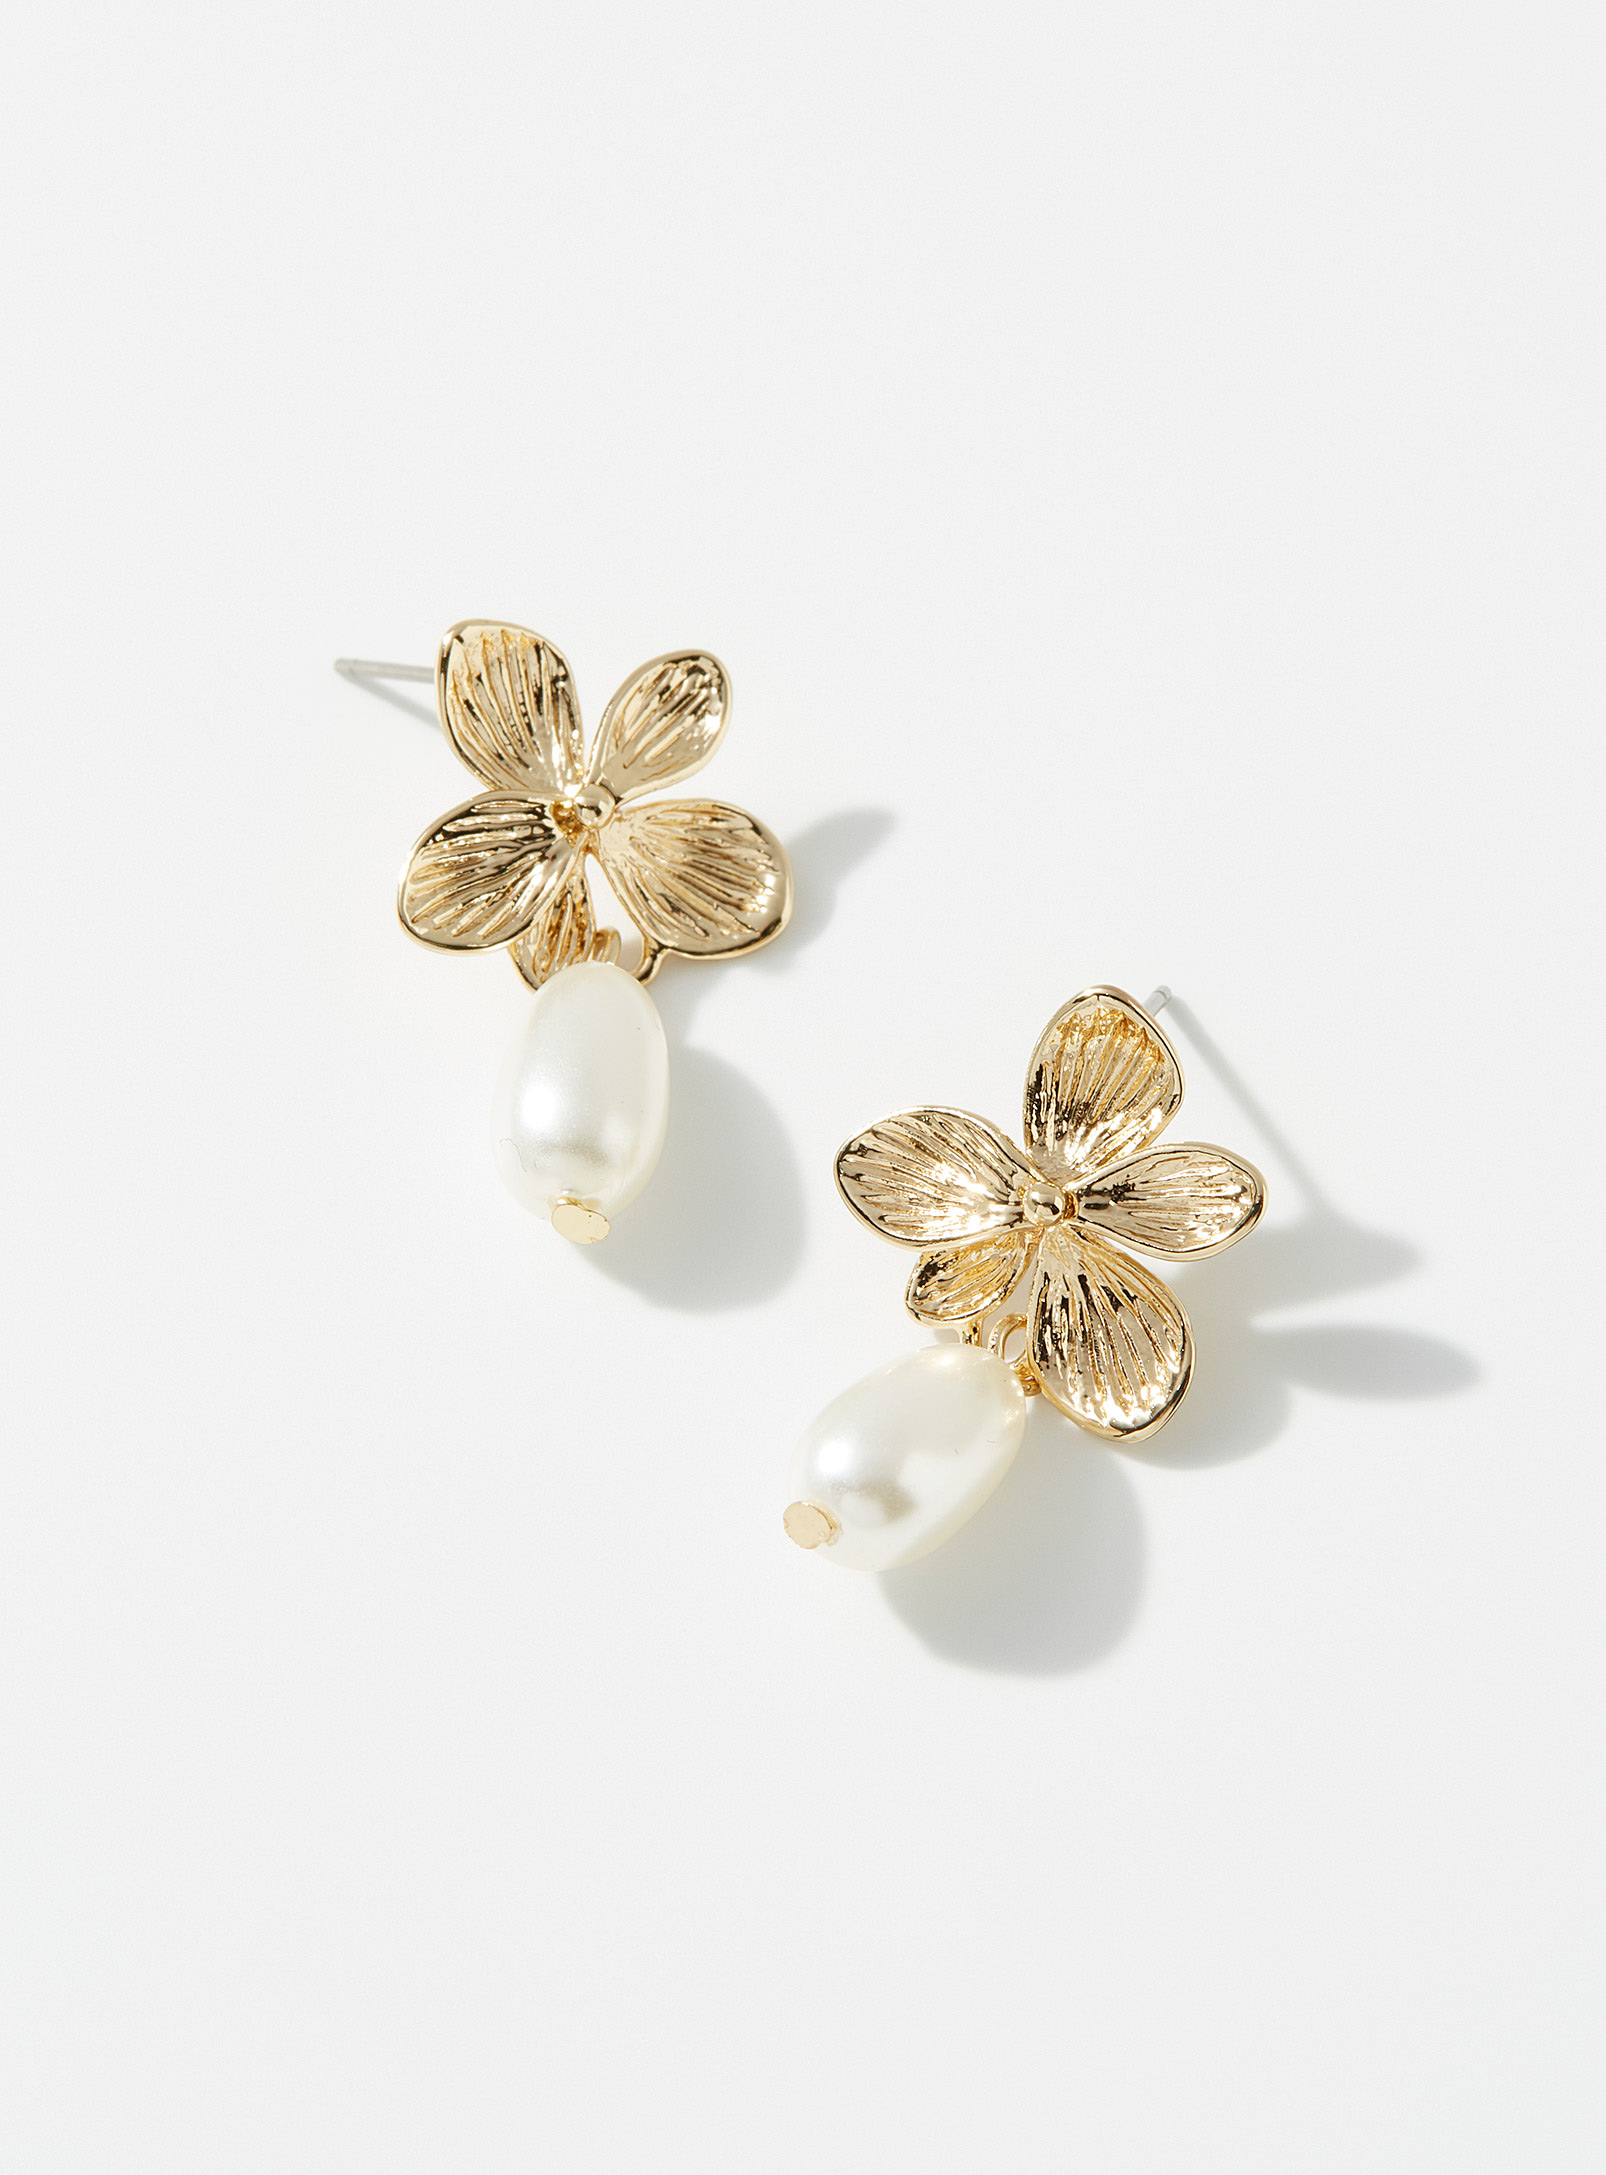 Simons - Women's Pearly bead floral earrings